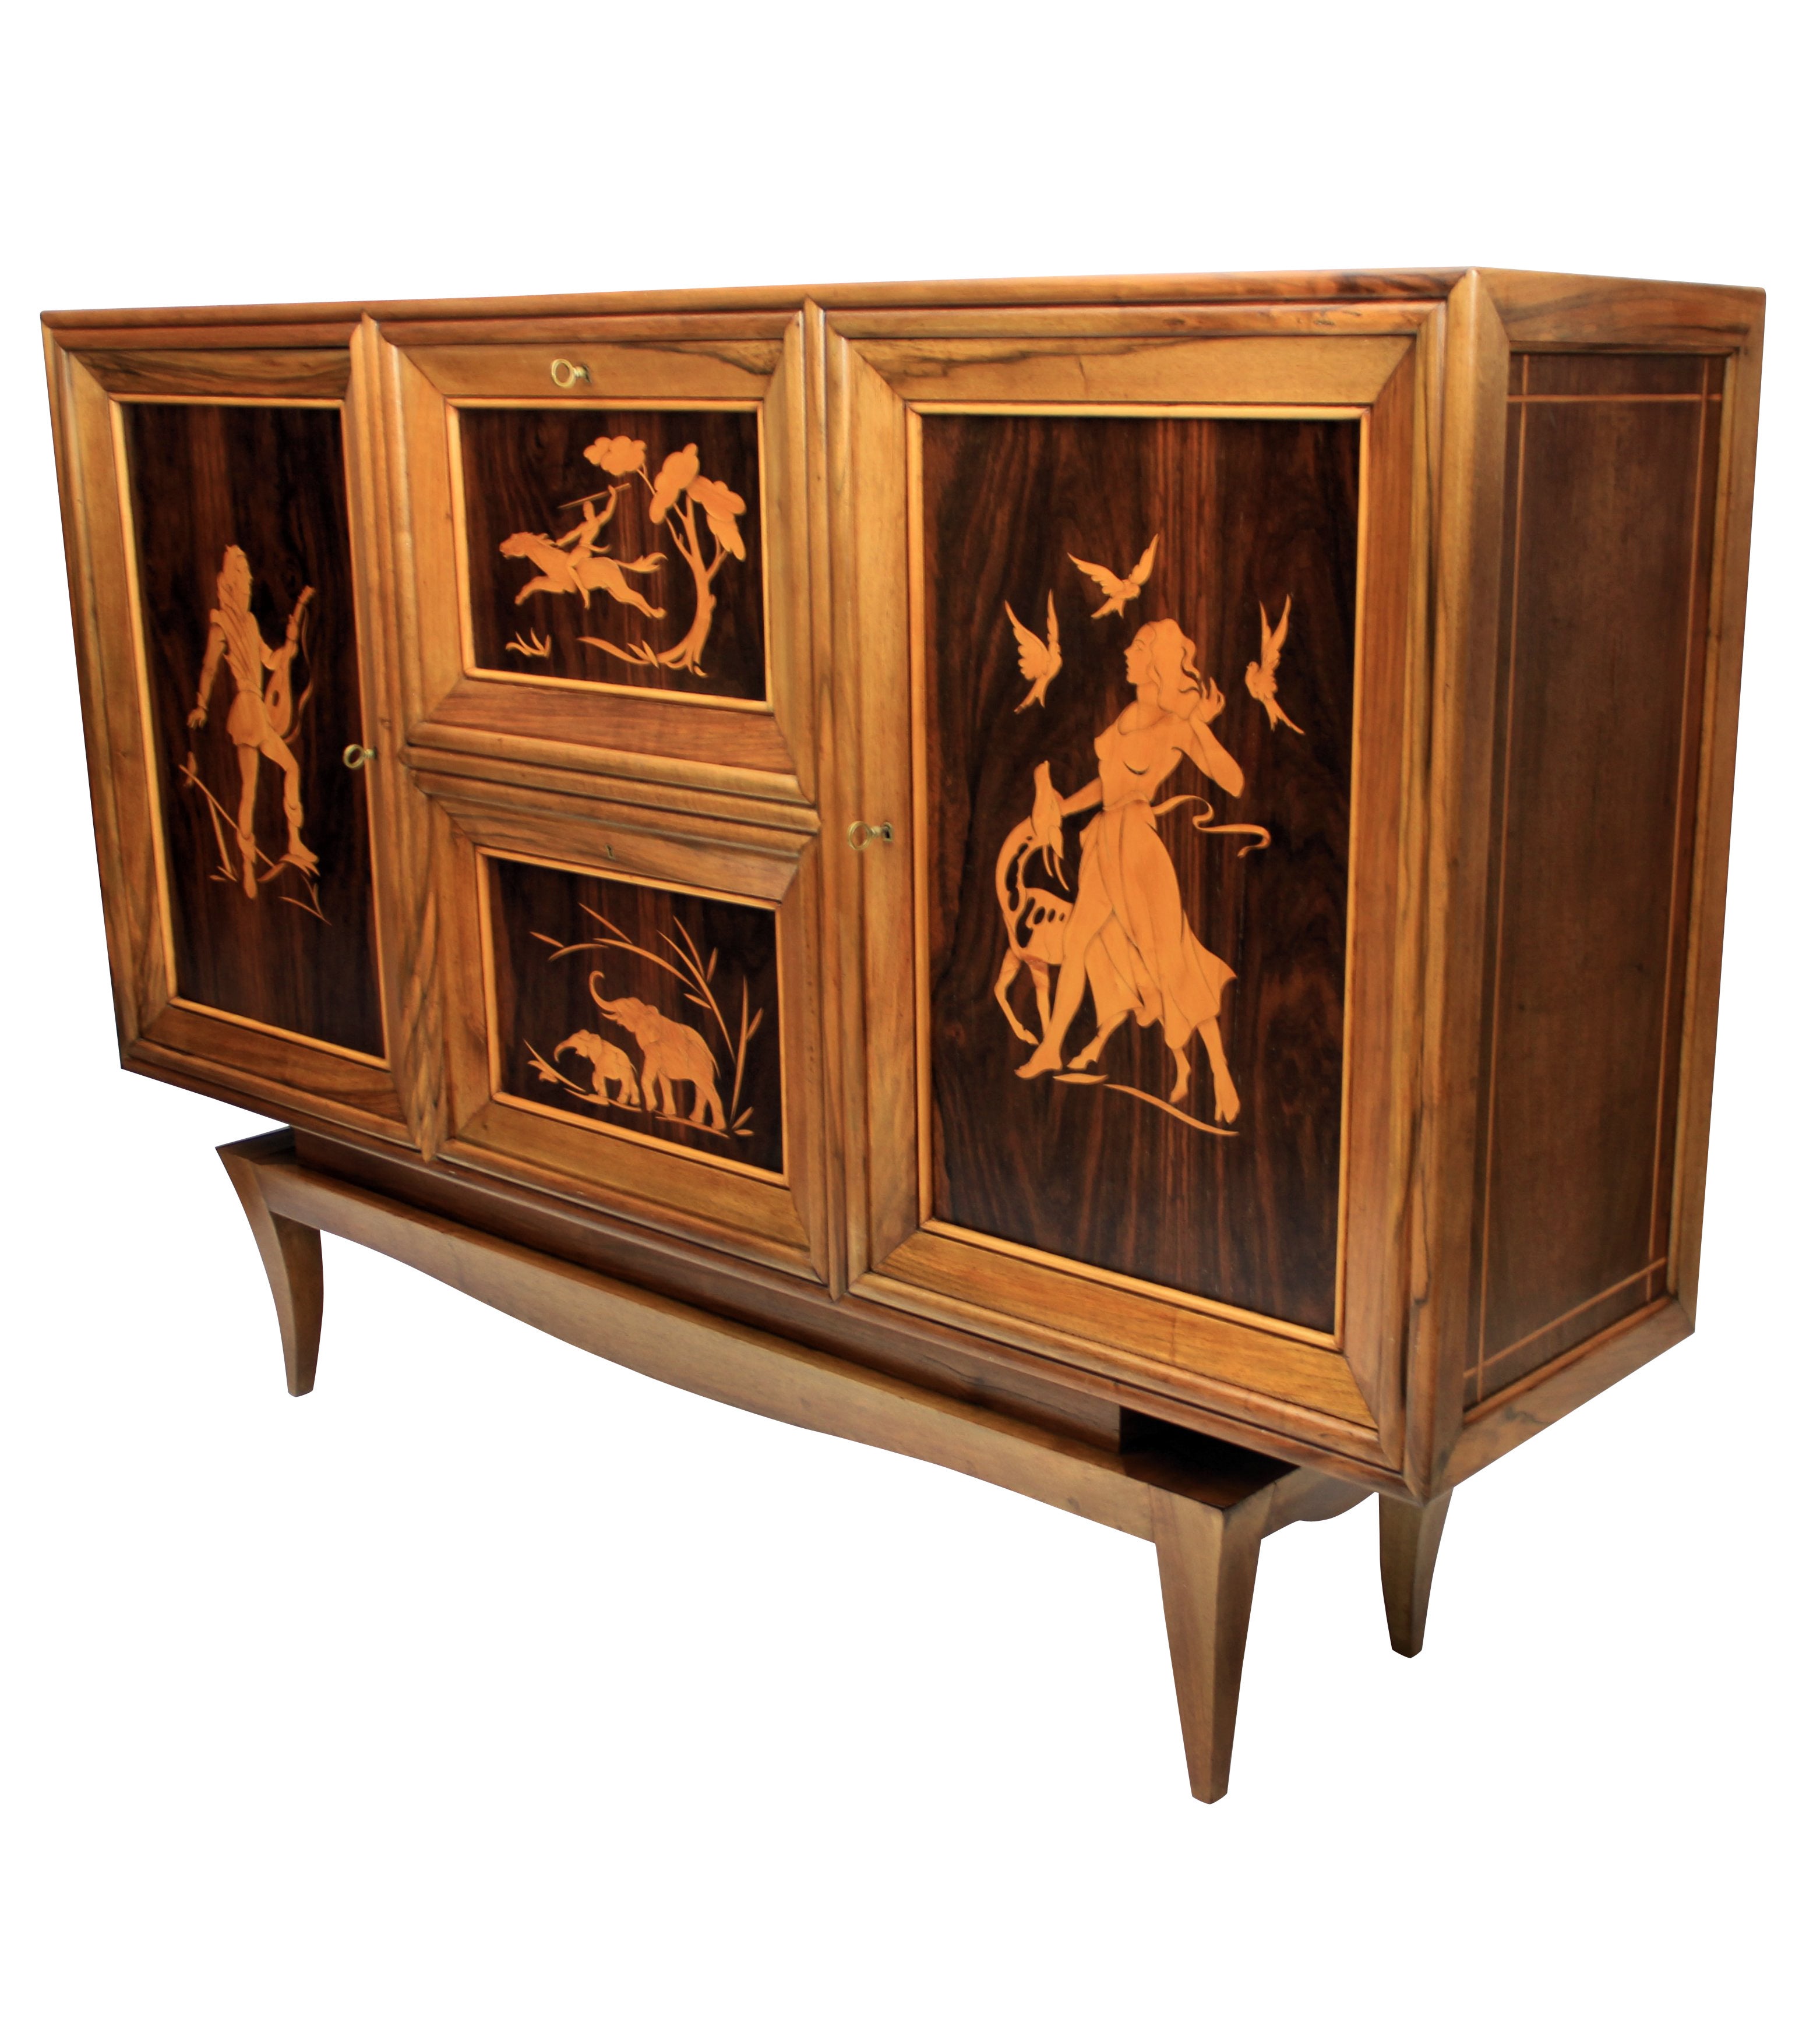 A Large Walnut Cabinet of Fine Quality Attributed to Colli